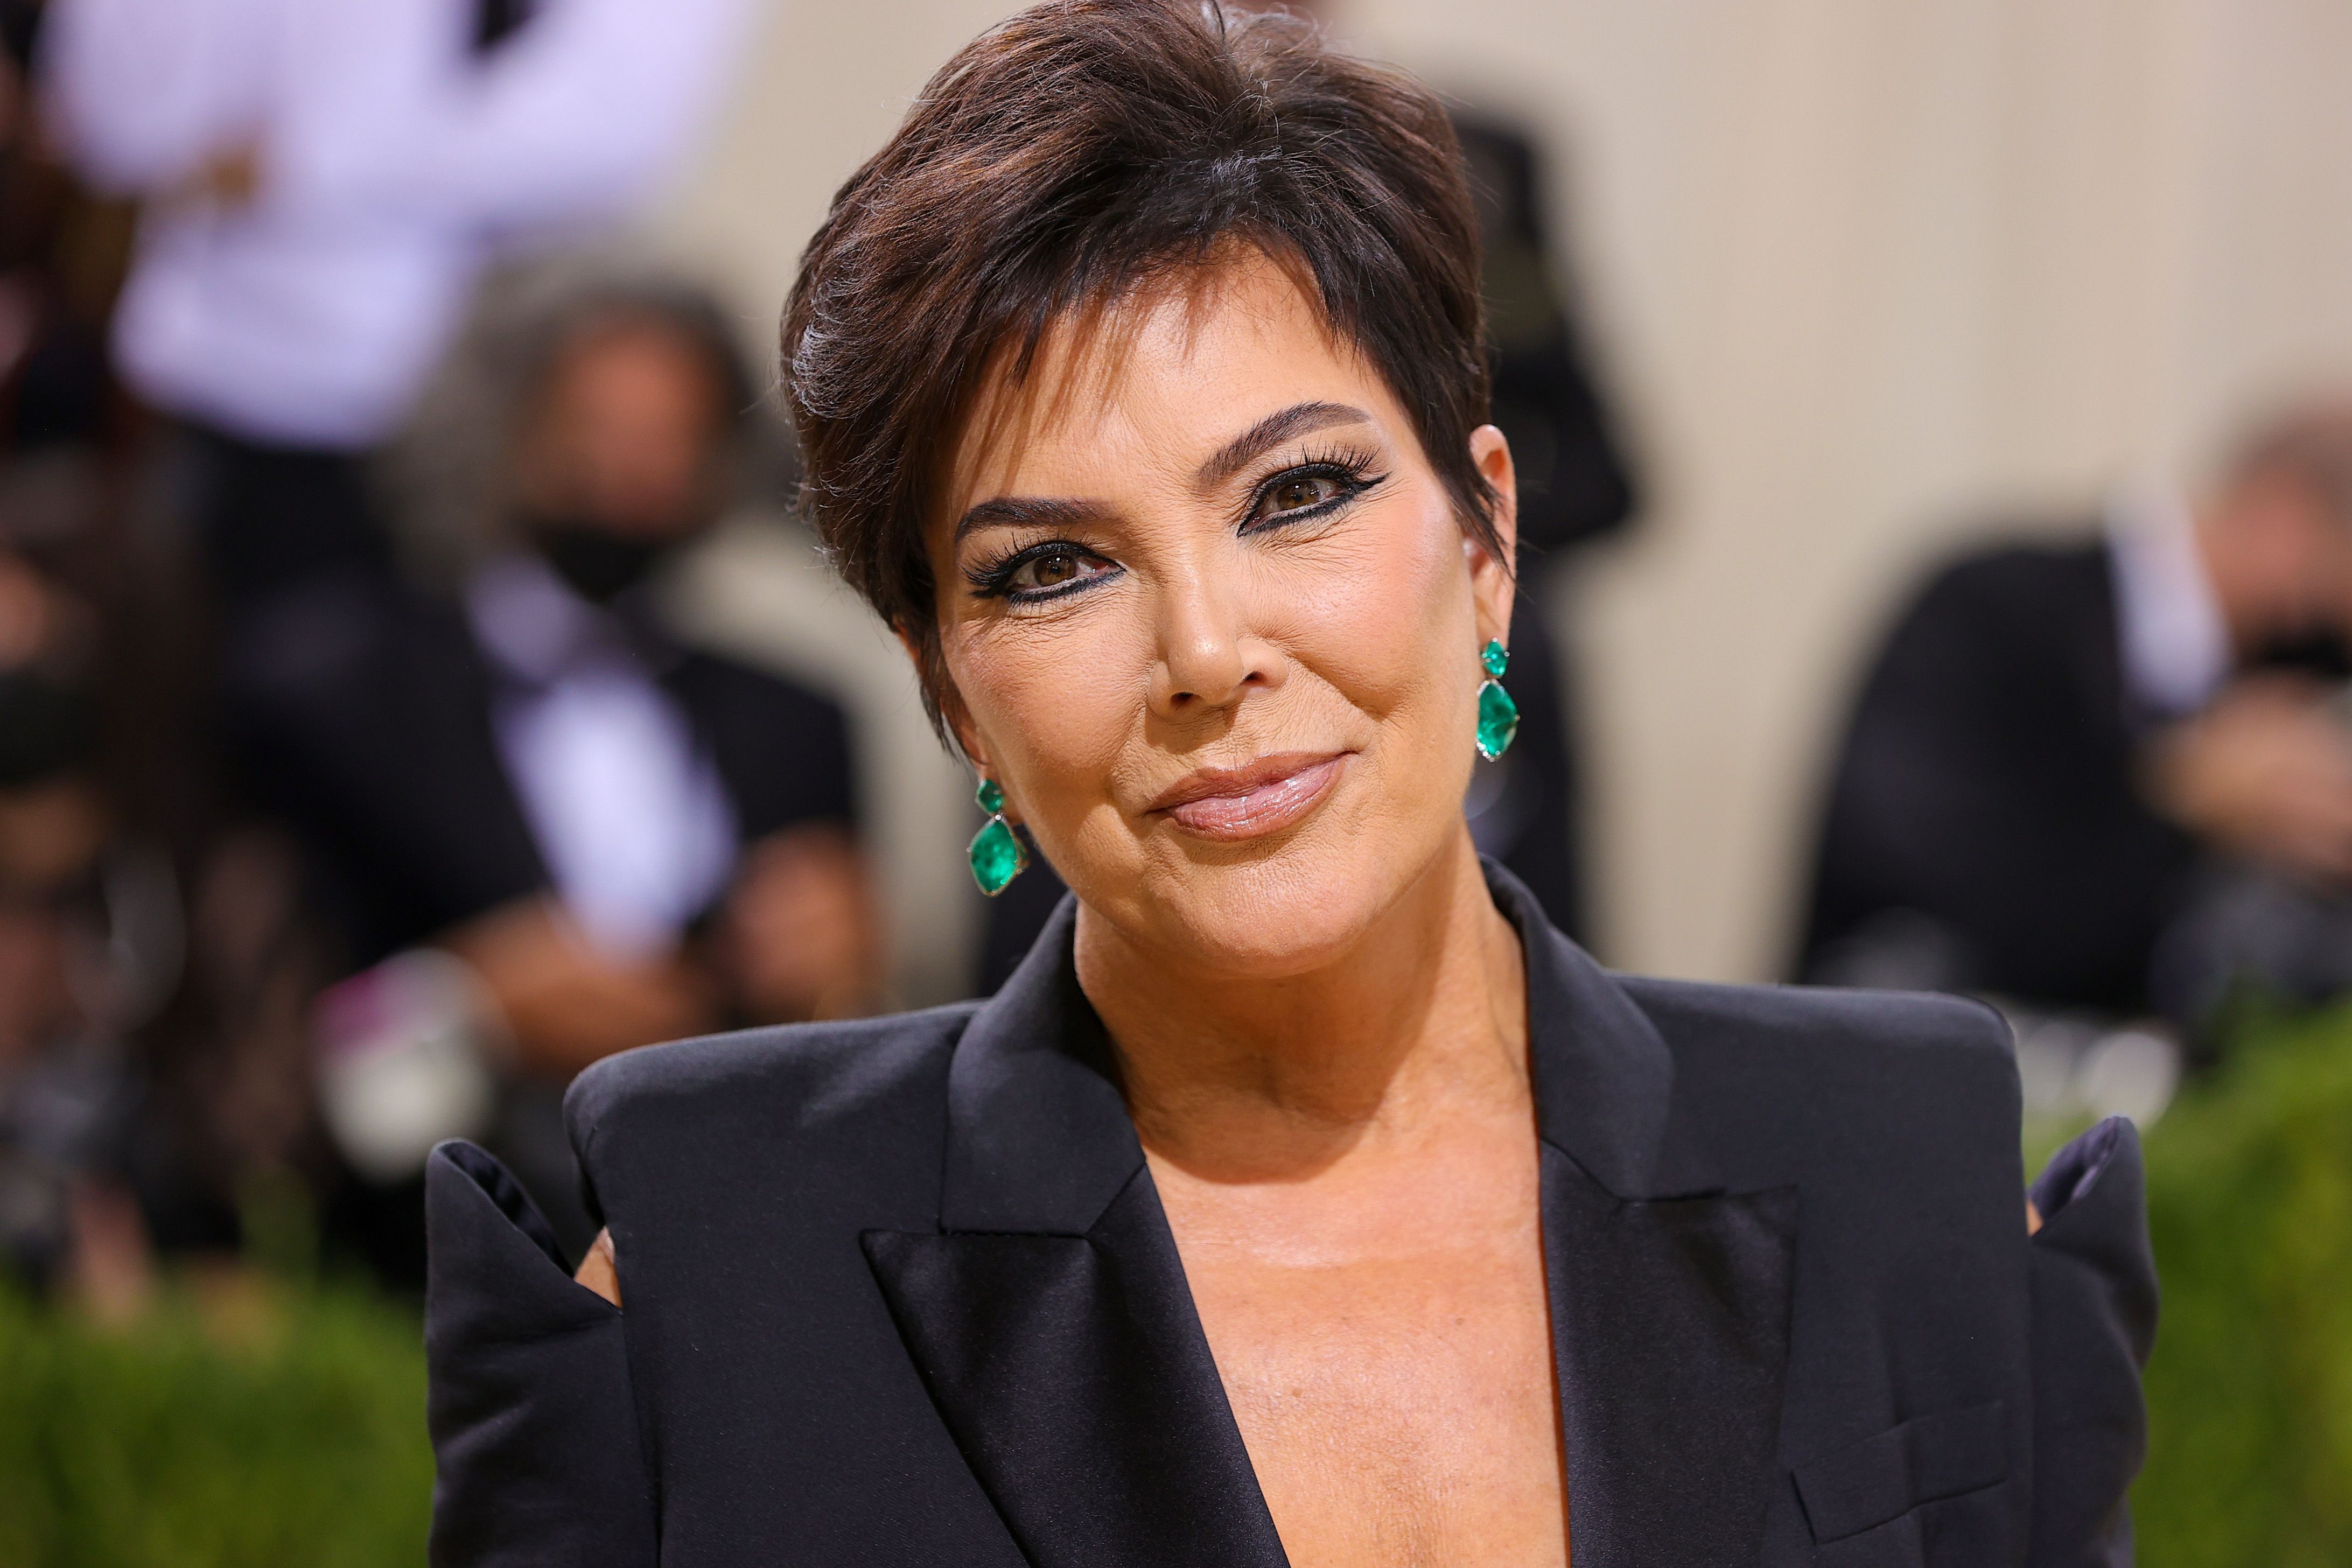 Kris Jenner Attends The 2021 Met Gala Celebrating In News Photo 1635679366 